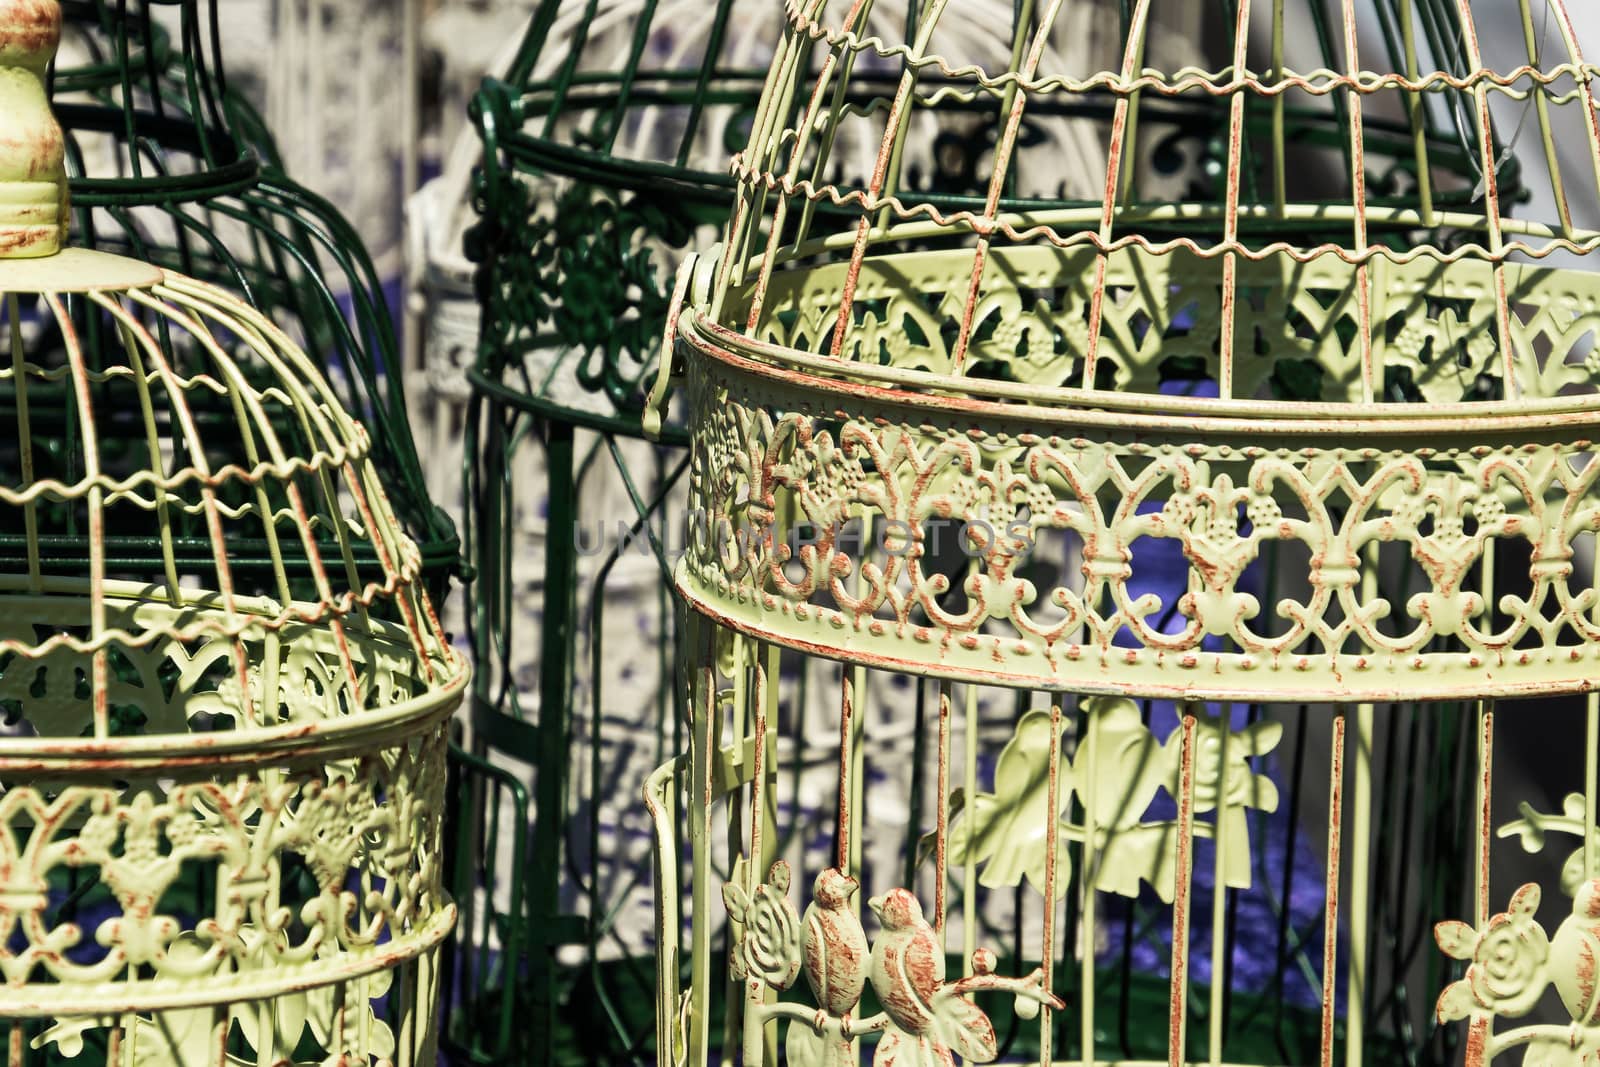 Antique bird cages decorated with ornaments at a flea market, Germany by geogif